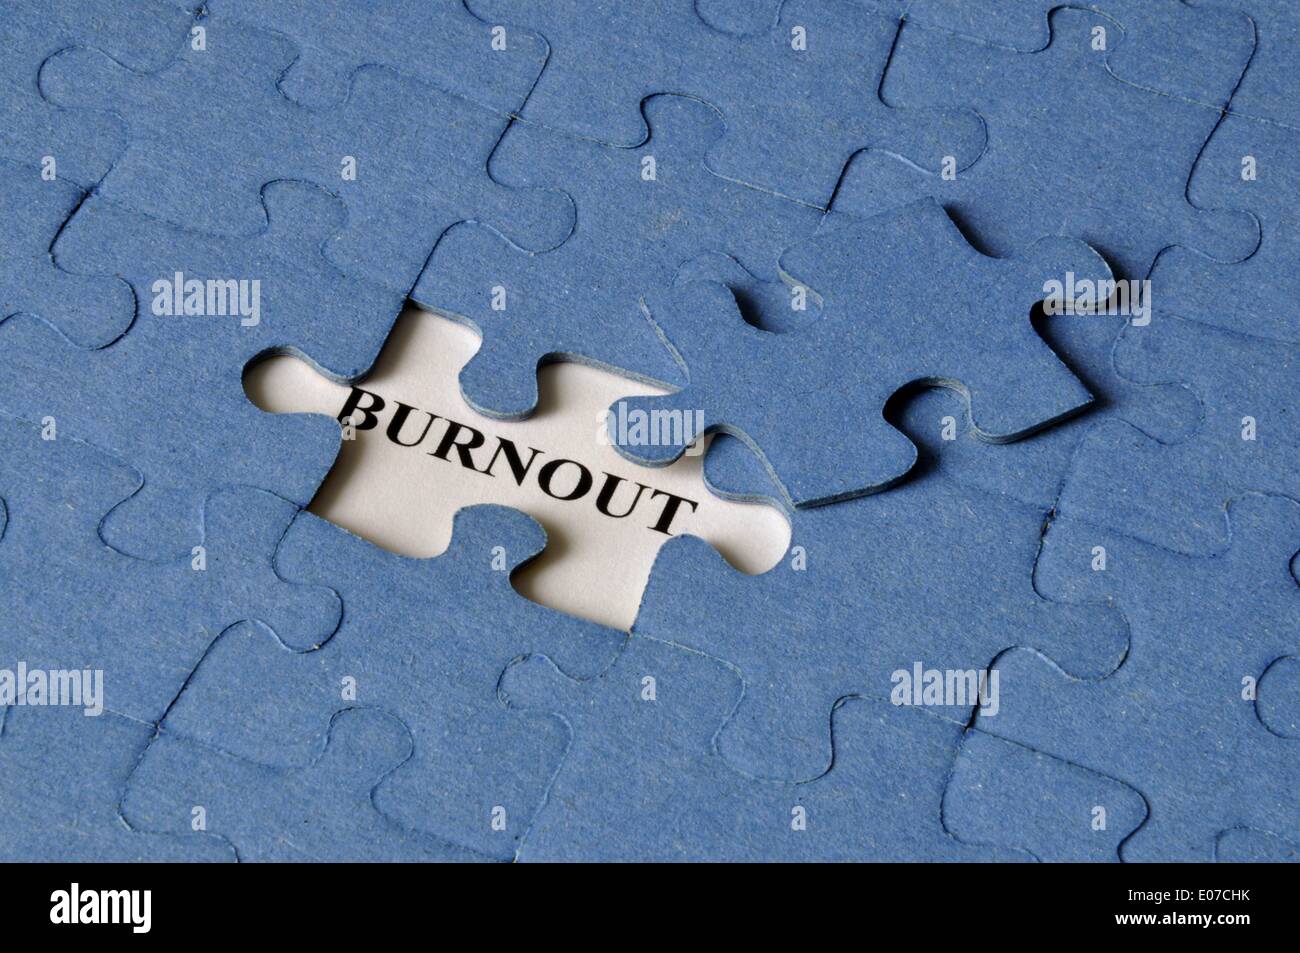 Illustration - The word 'Burnout' is read under a missing piece of a jigsaw puzzle in Germany, 27 April 2011. Fotoarchiv für ZeitgeschichteS. Steinach - NO WIRE SERVICE Stock Photo